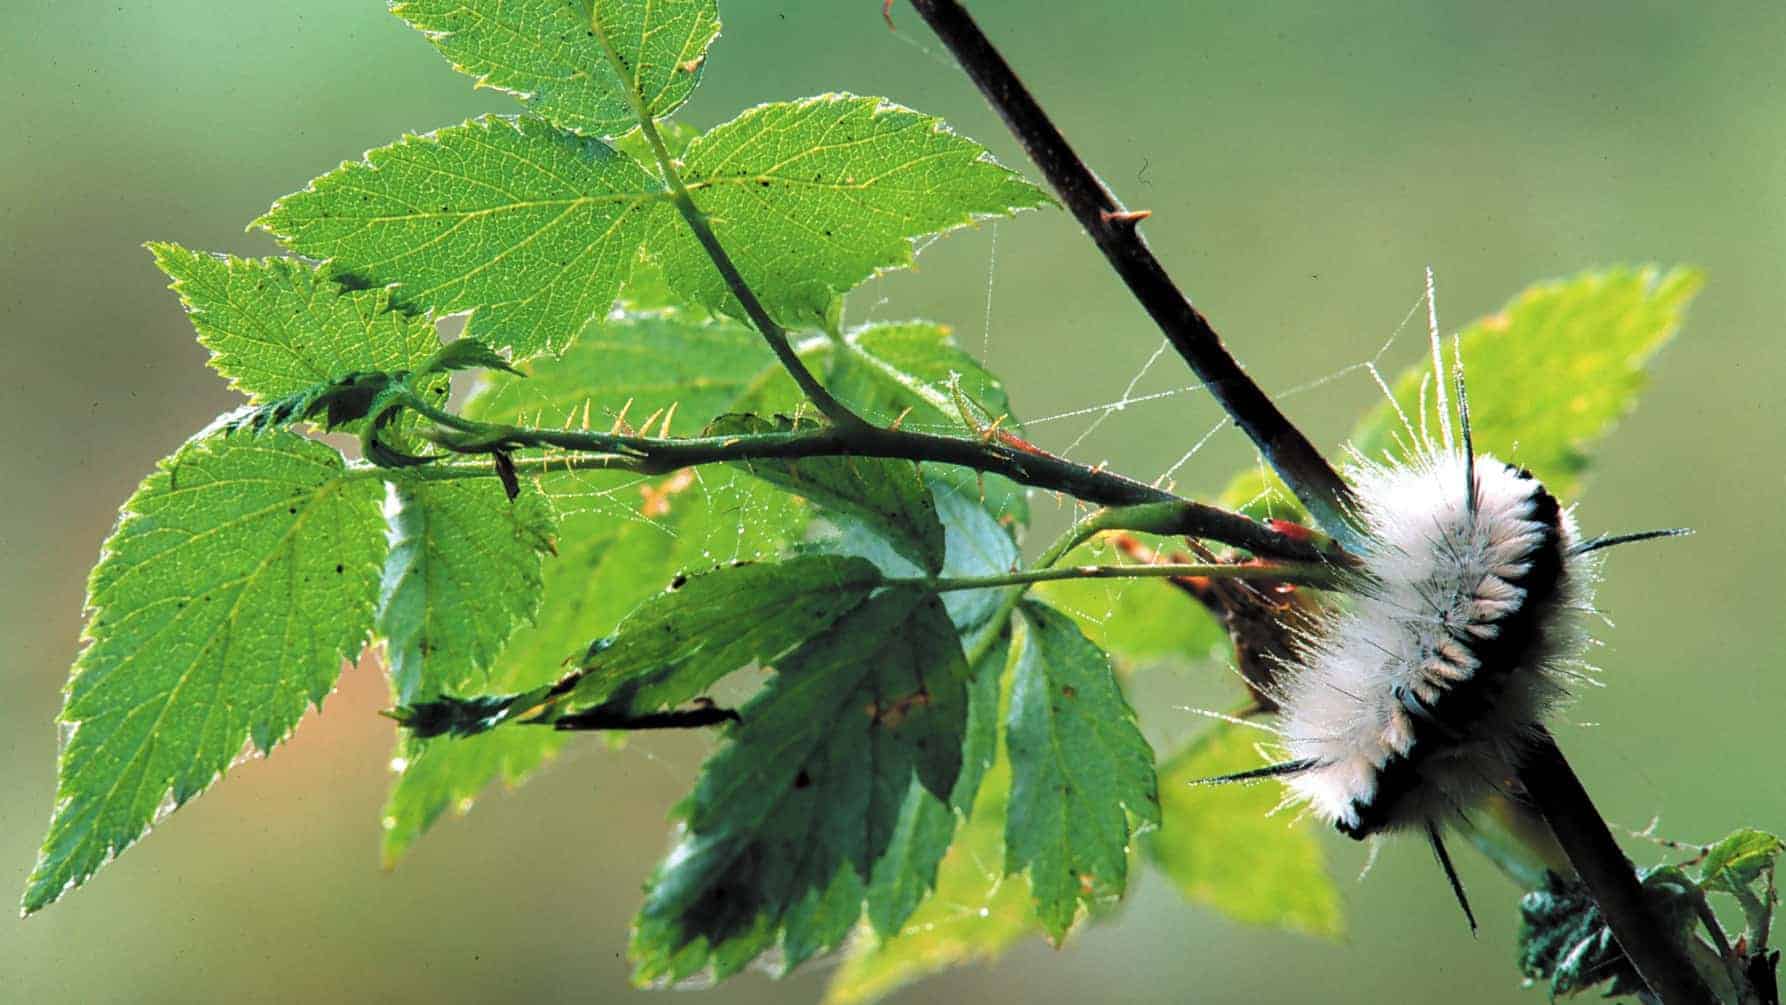 A black and white fuzzy caterpillar climbs a stem at Bartholomew's Cobble. Press photo courtesy of Trustees of Reservations.